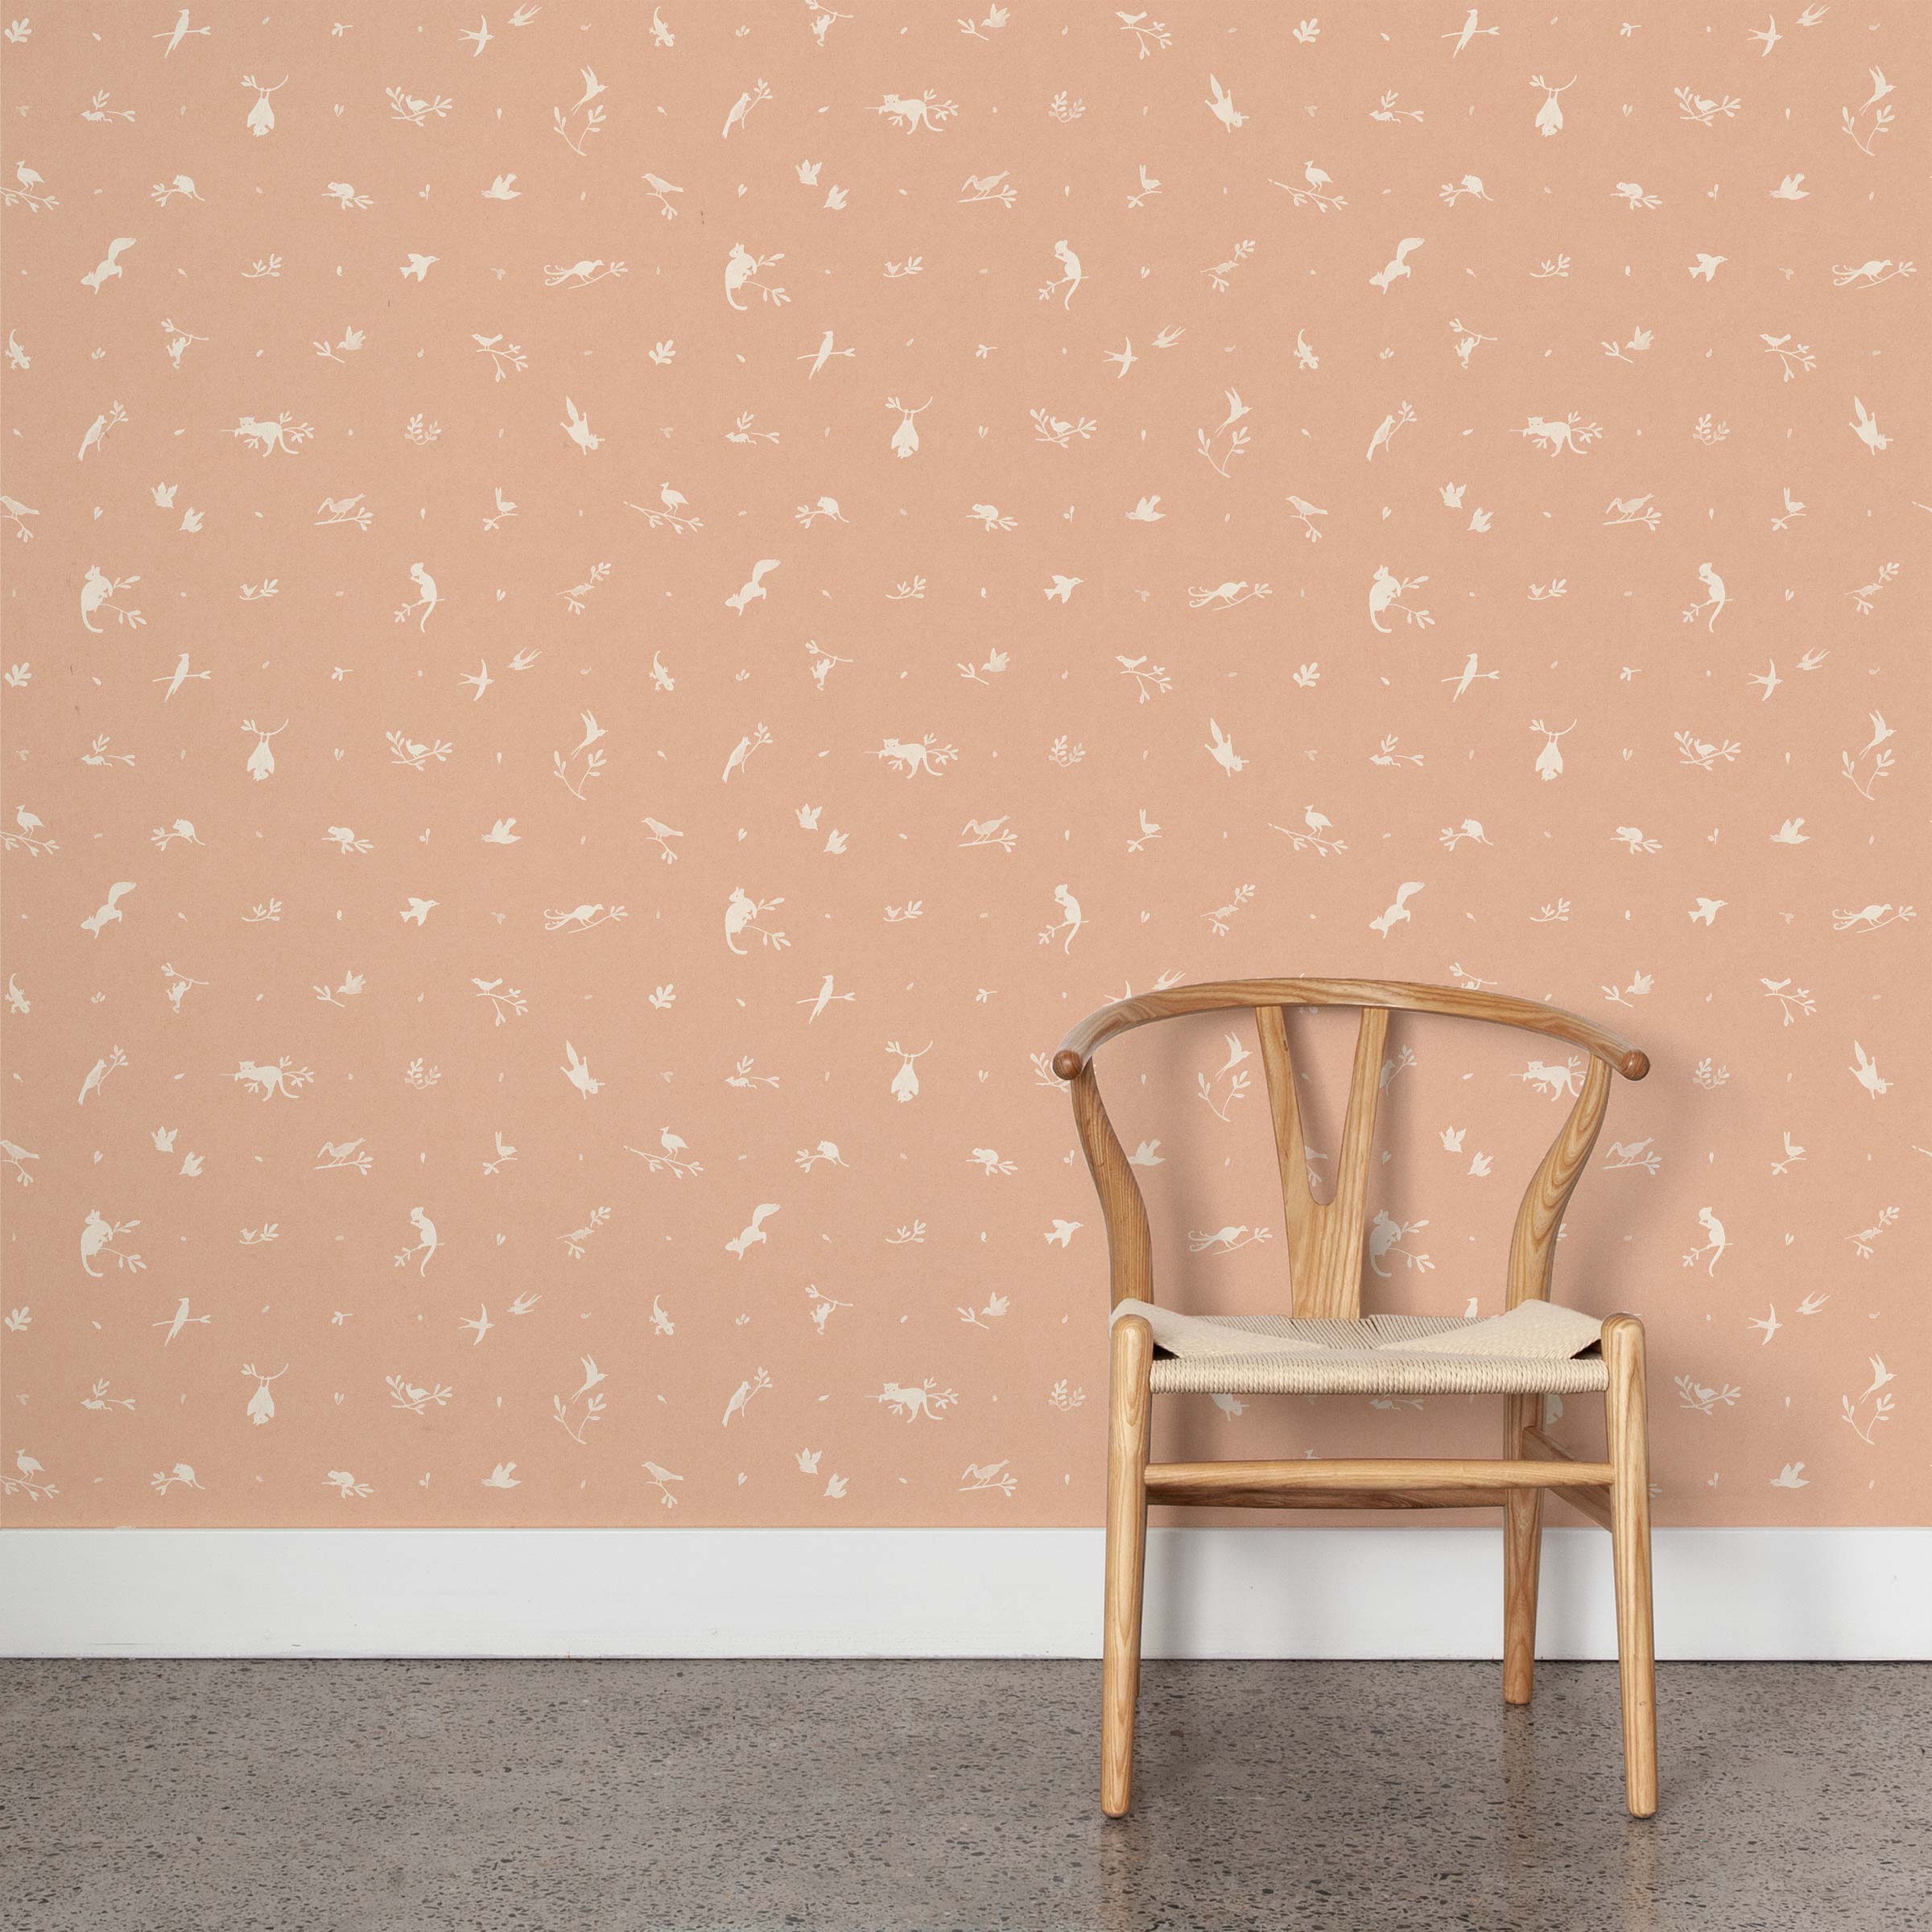 A wooden chair stands in front of a wall papered in a playful animal and branch print in white on a coral field.